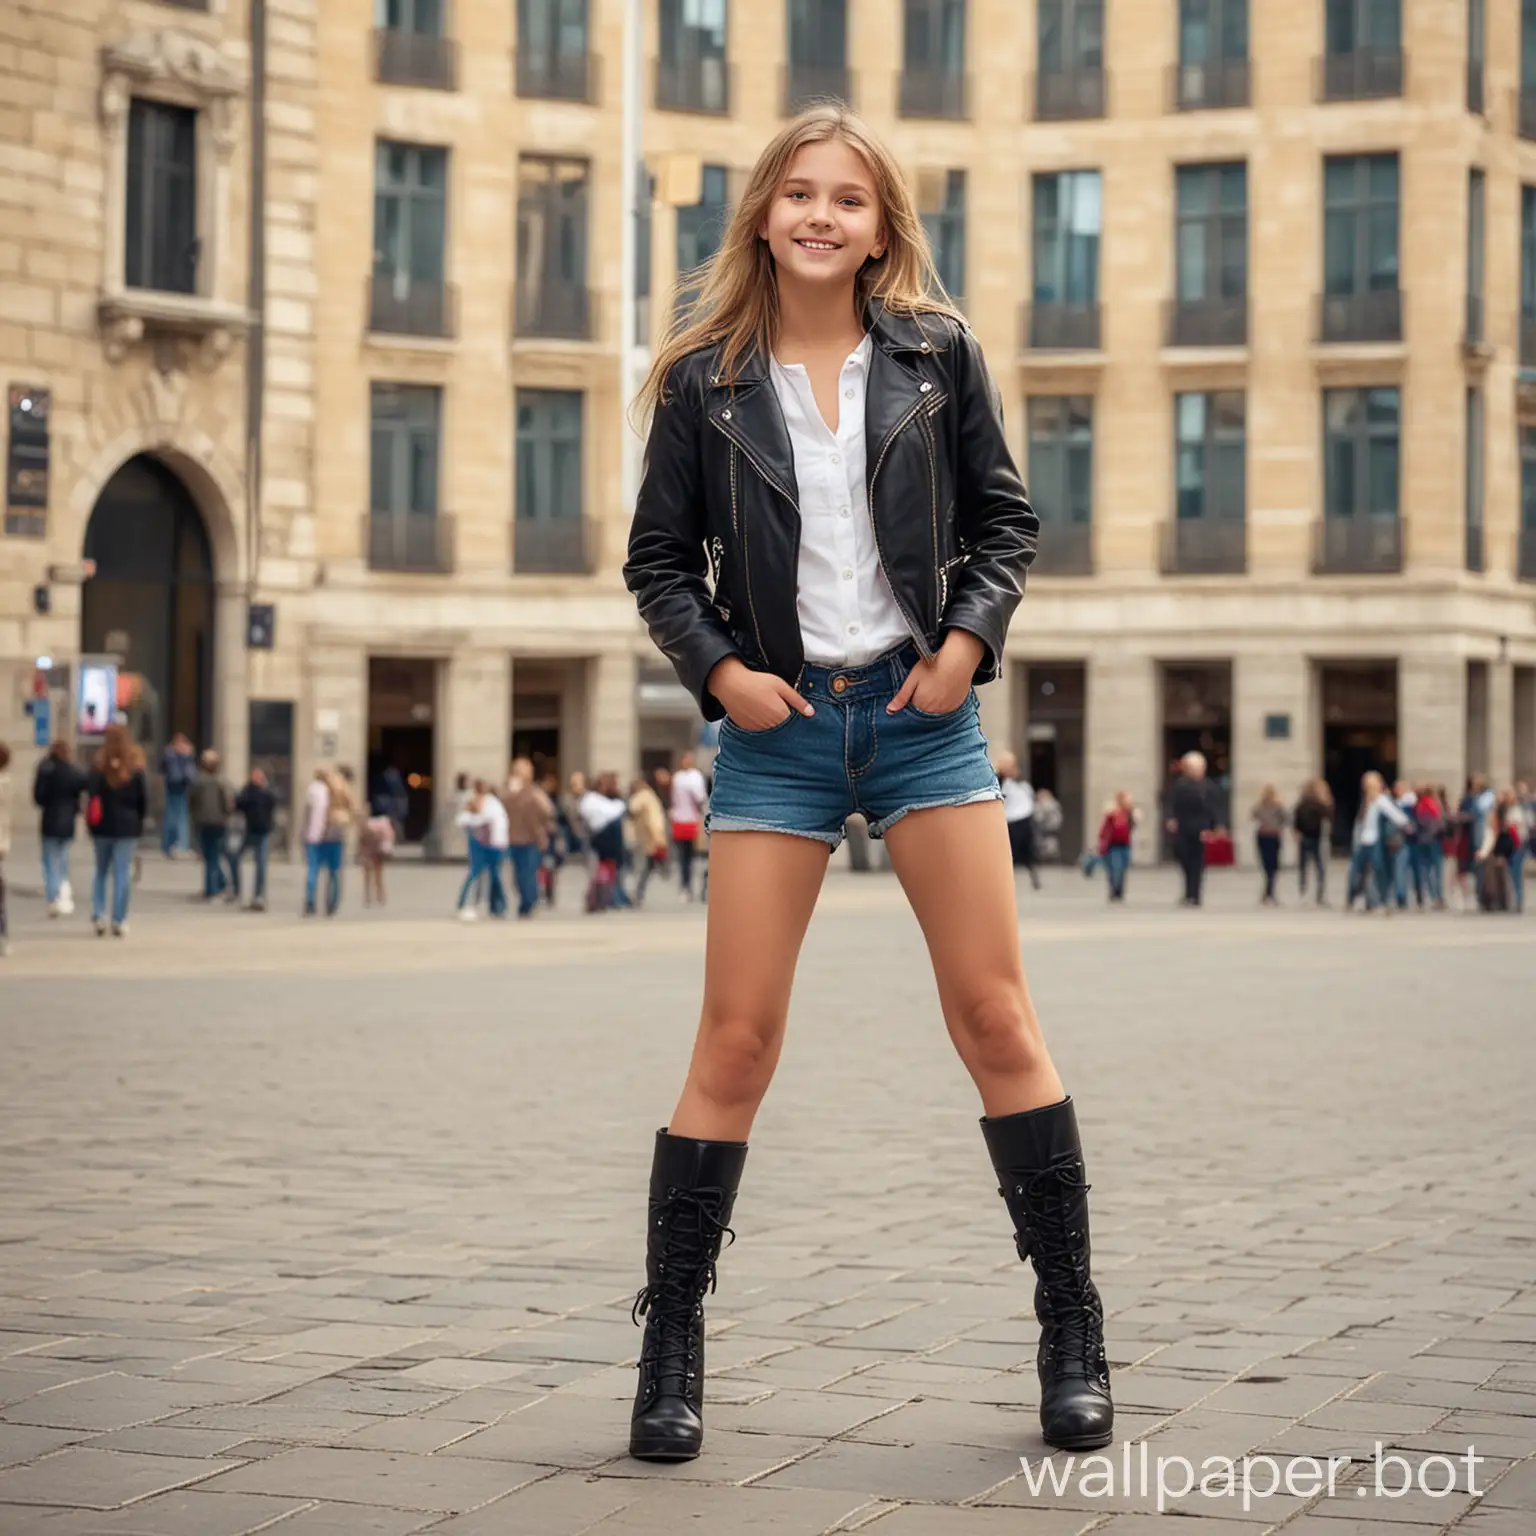 Dynamic-Poses-Happy-Girls-in-Heeled-Boots-at-City-Square